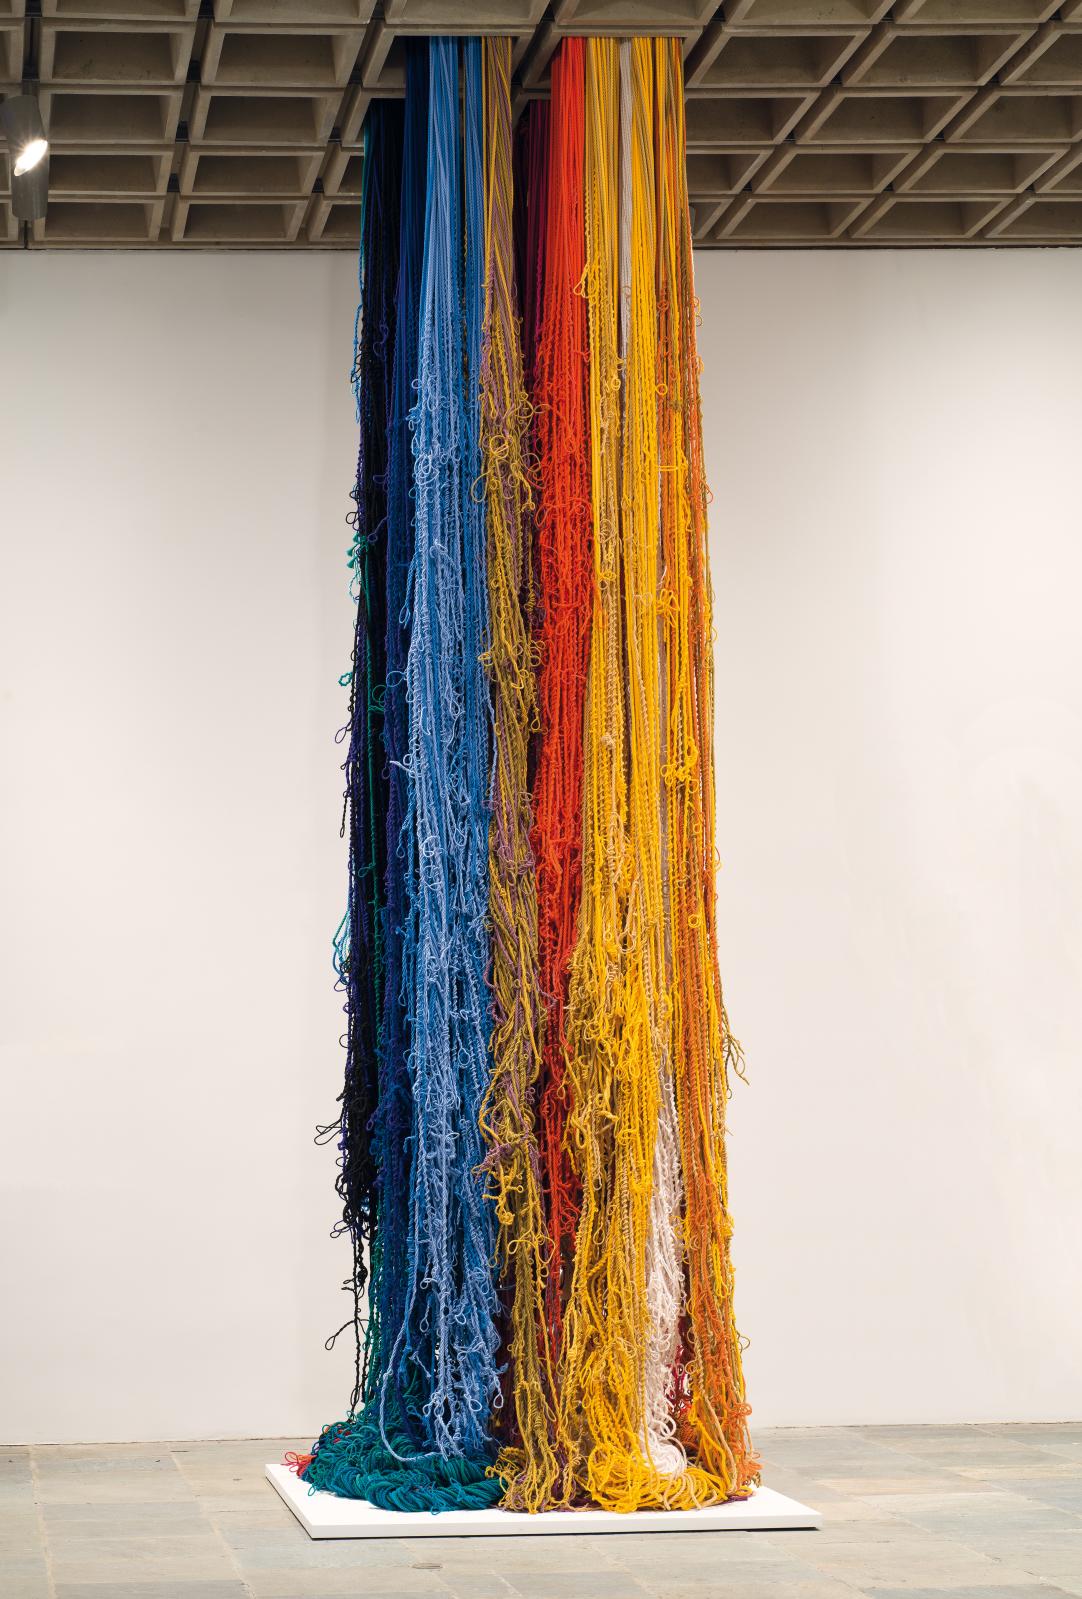 Pillar of Inquiry/Supple Collumn, 2013-2014, The Museum of Modern Art, New York. Don de Sheila Hicks, Glen Raven Inc., and Sikkema Jenkins and Co.